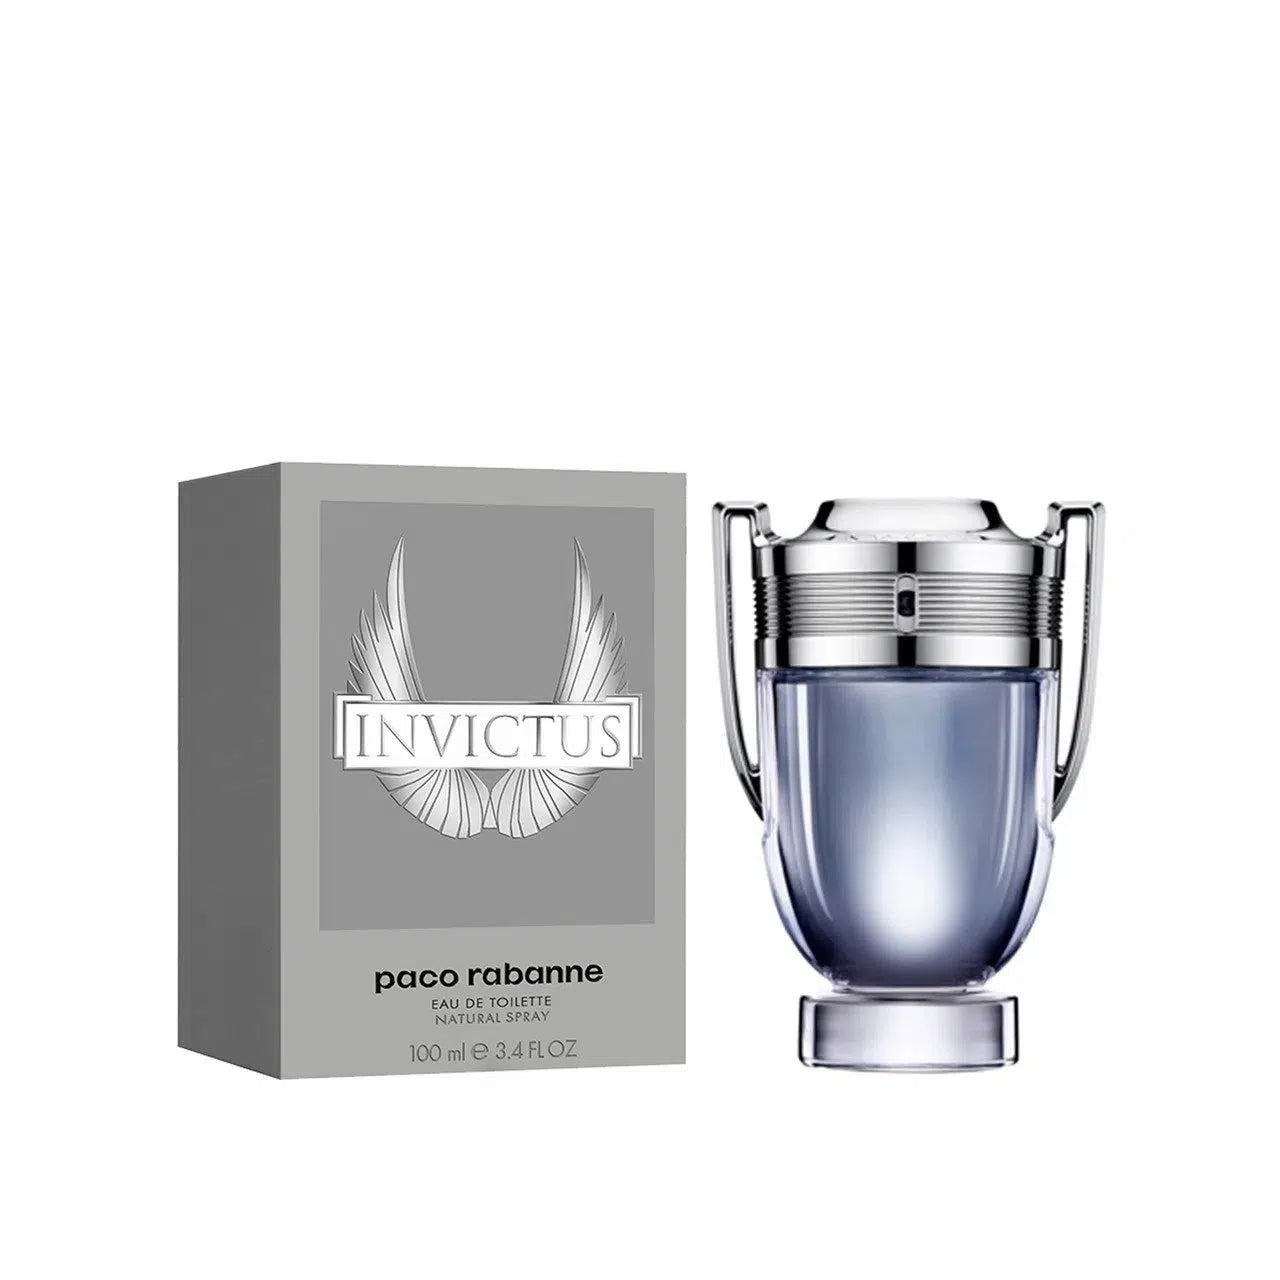 Buy Paco Rabanne Invictus 100ml for P5095.00 Only!